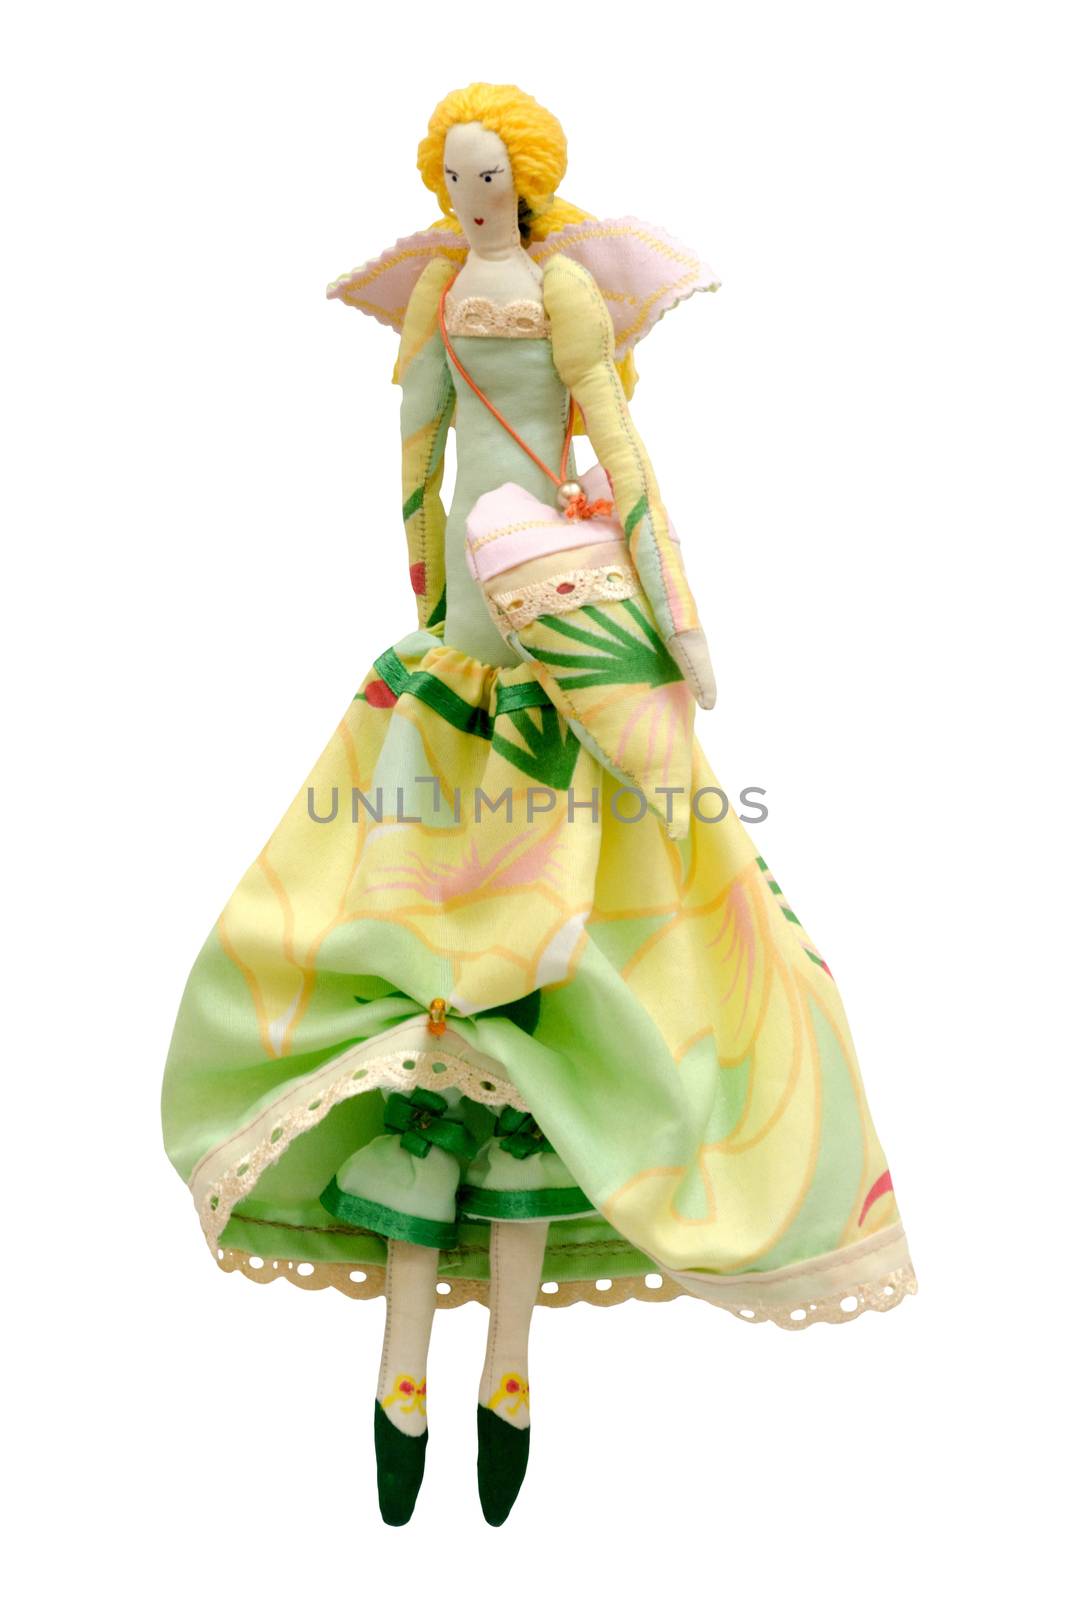 The Handmade doll isolated in ball gown with wings and a bag in the shape of heart